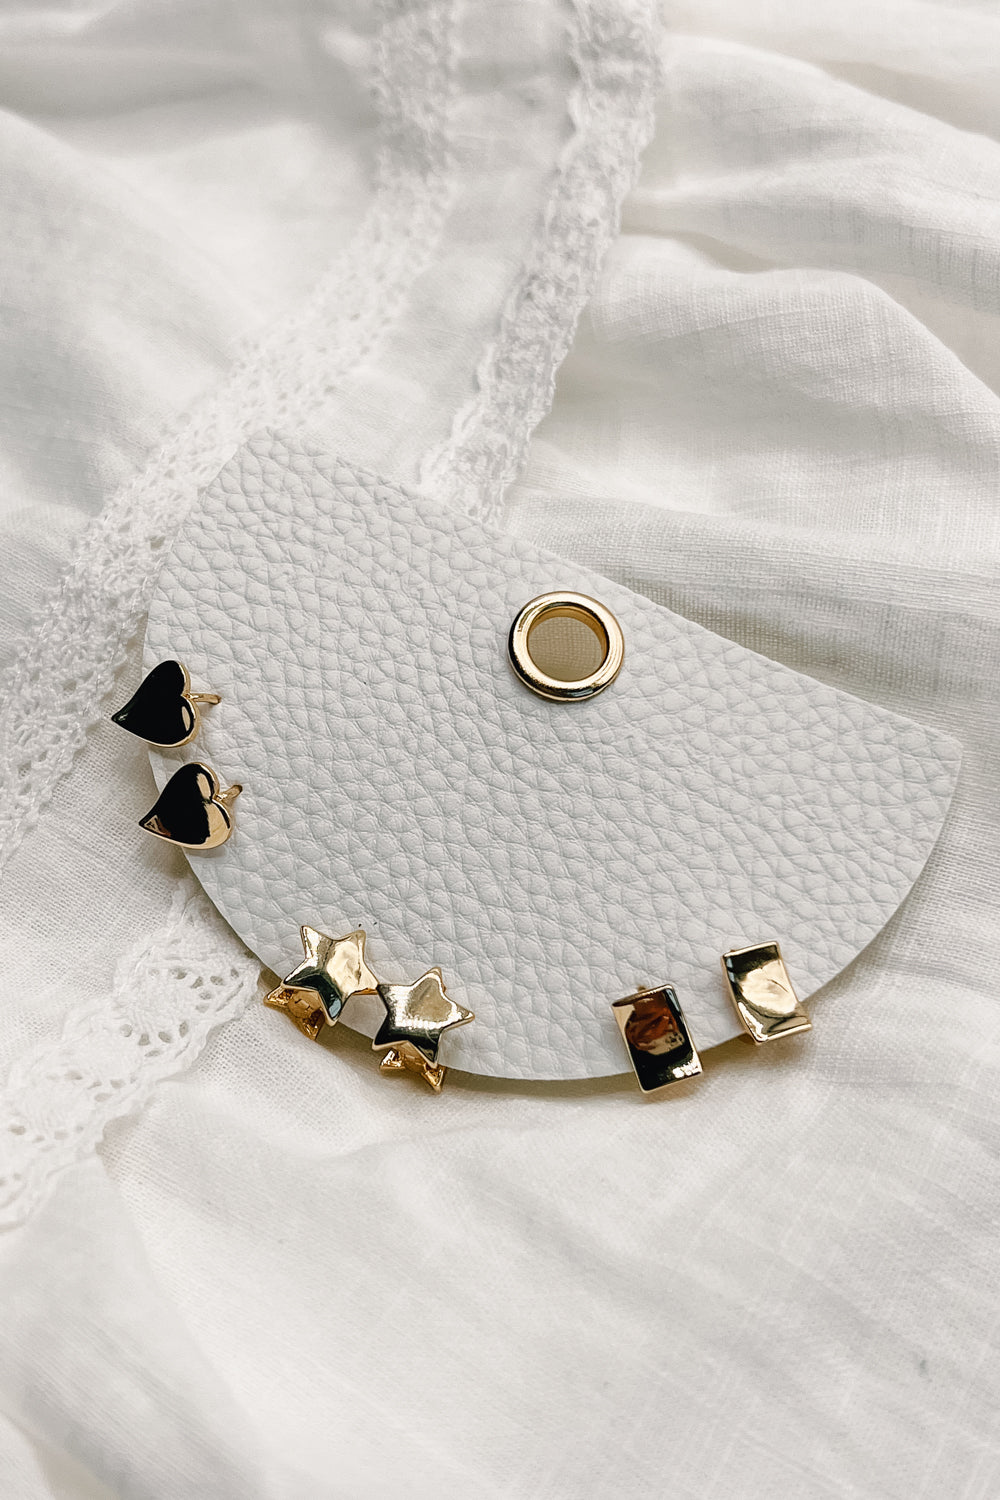 Alternate view of The Clarissa Gold Earring Set is pictured. The set includes three pairs of earrings.